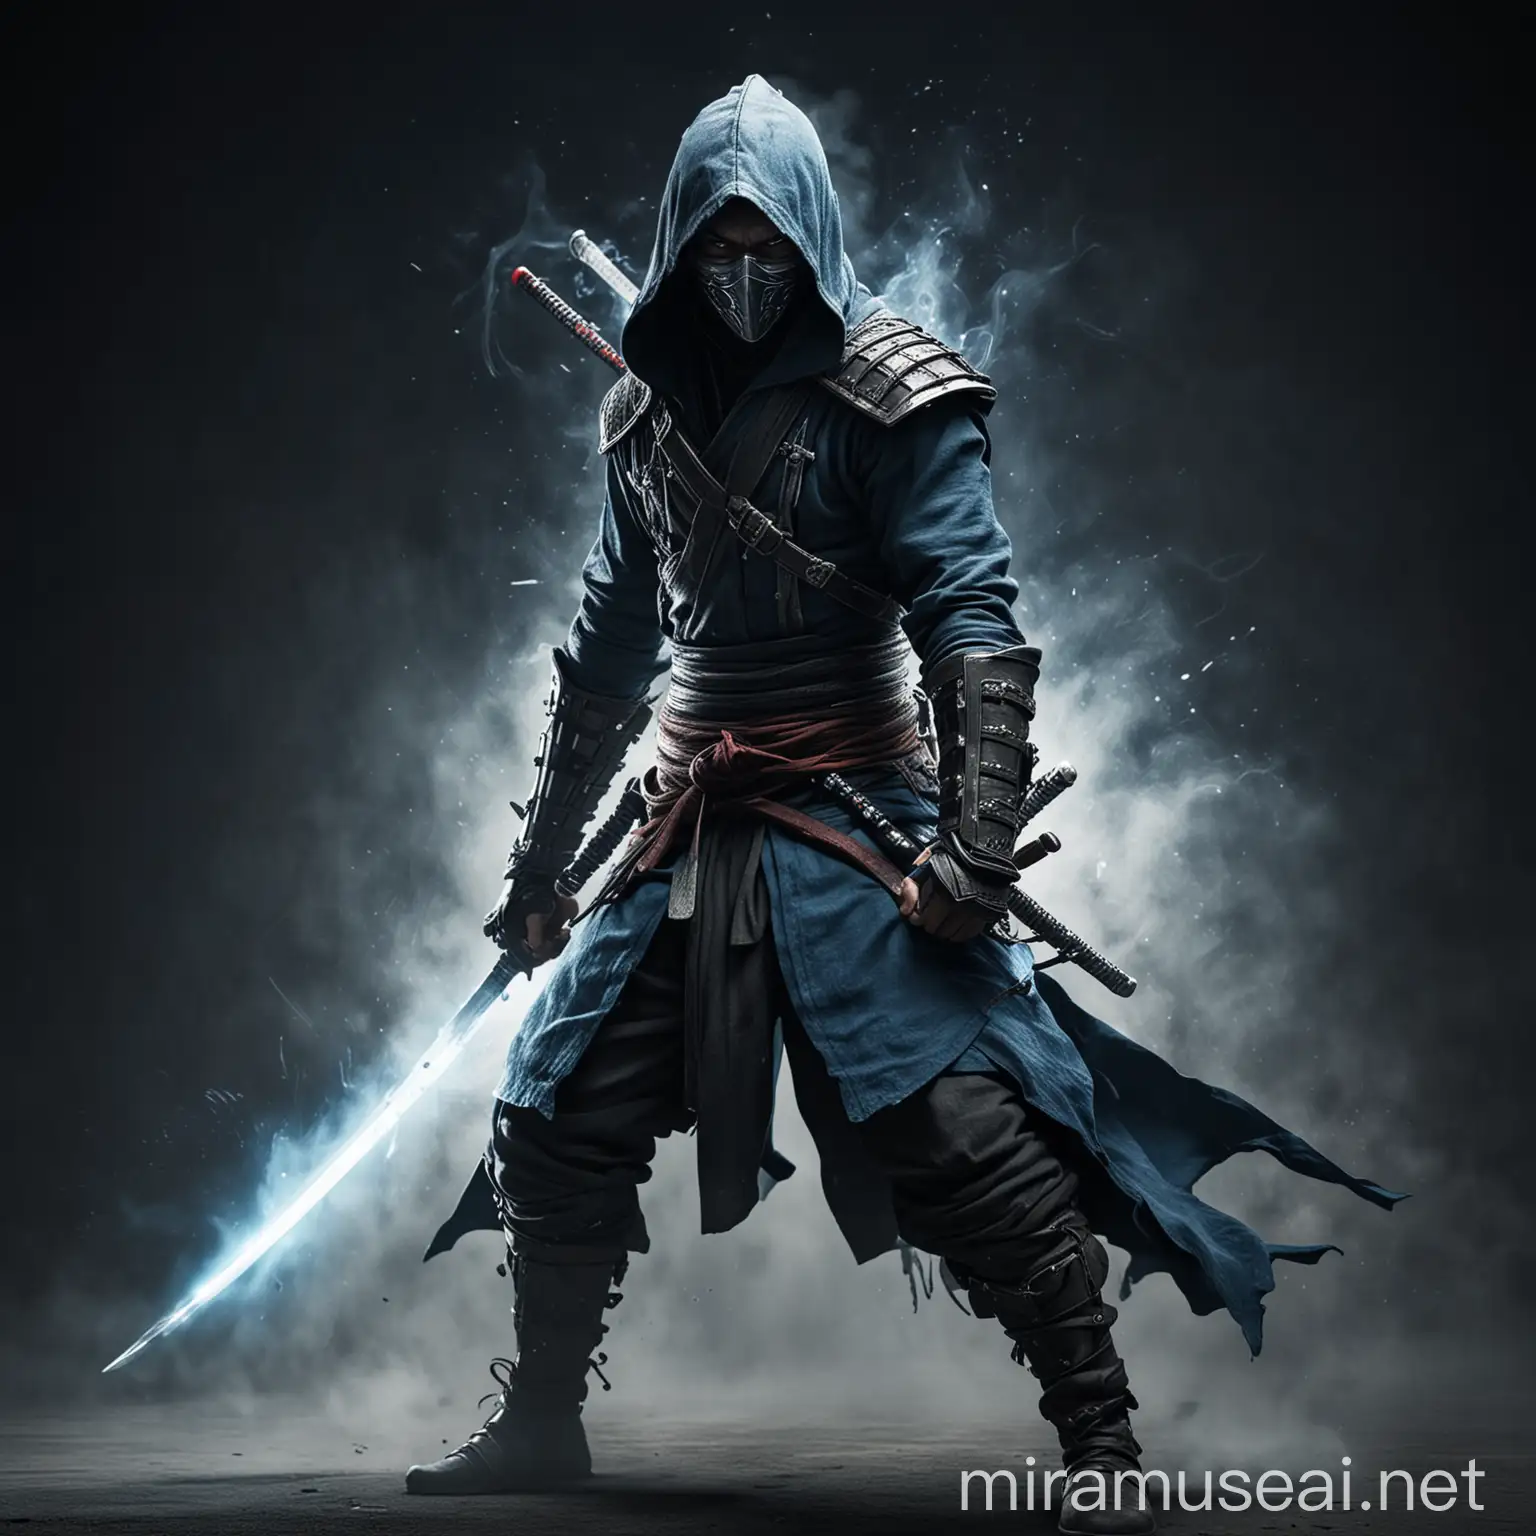 Hooded Samurai Warrior with Glowing Silver Sword in Dimly Lit Setting